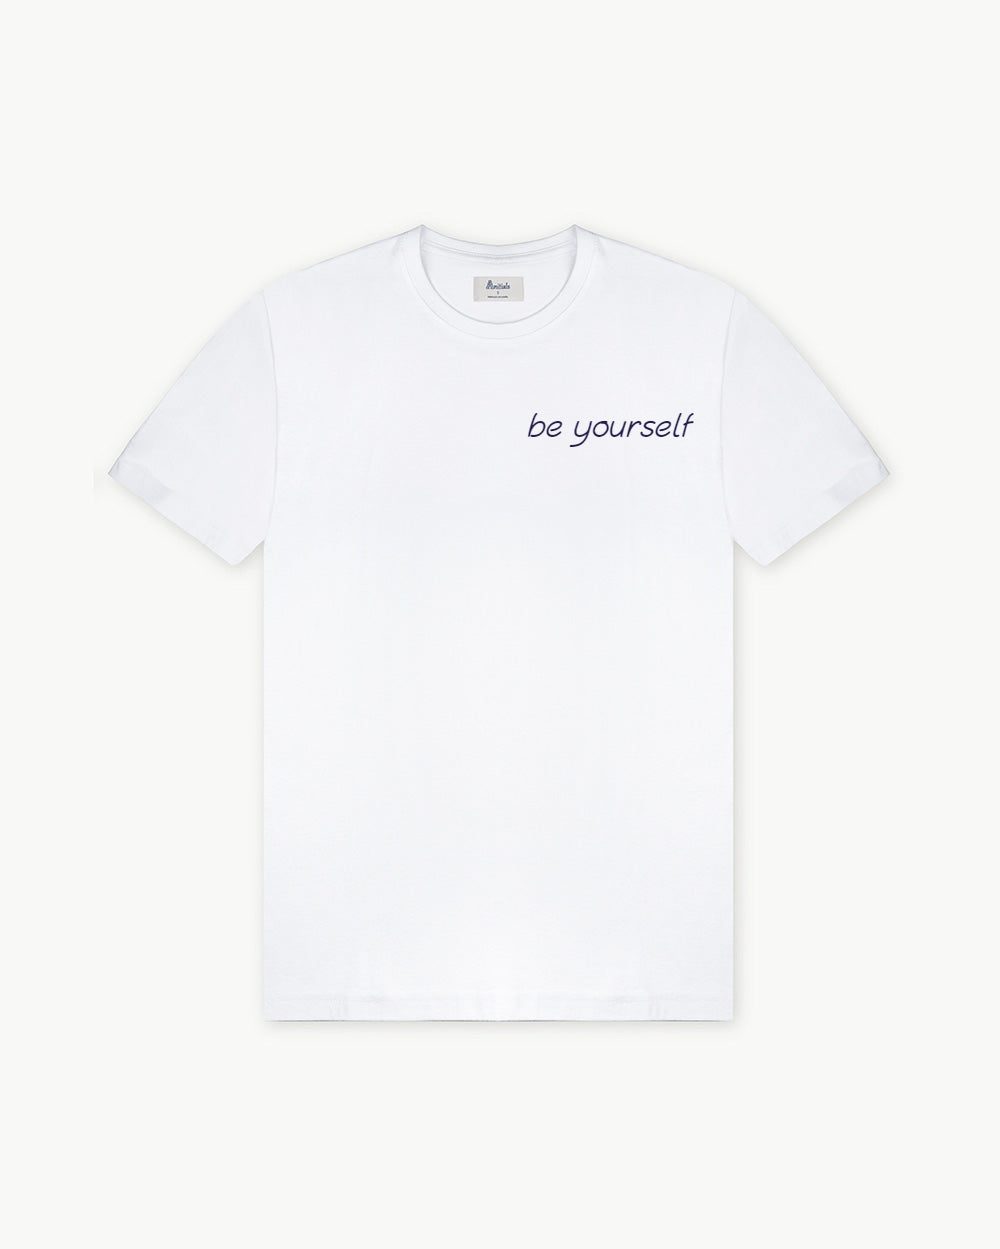 WHITE T-SHIRT "be yourself"